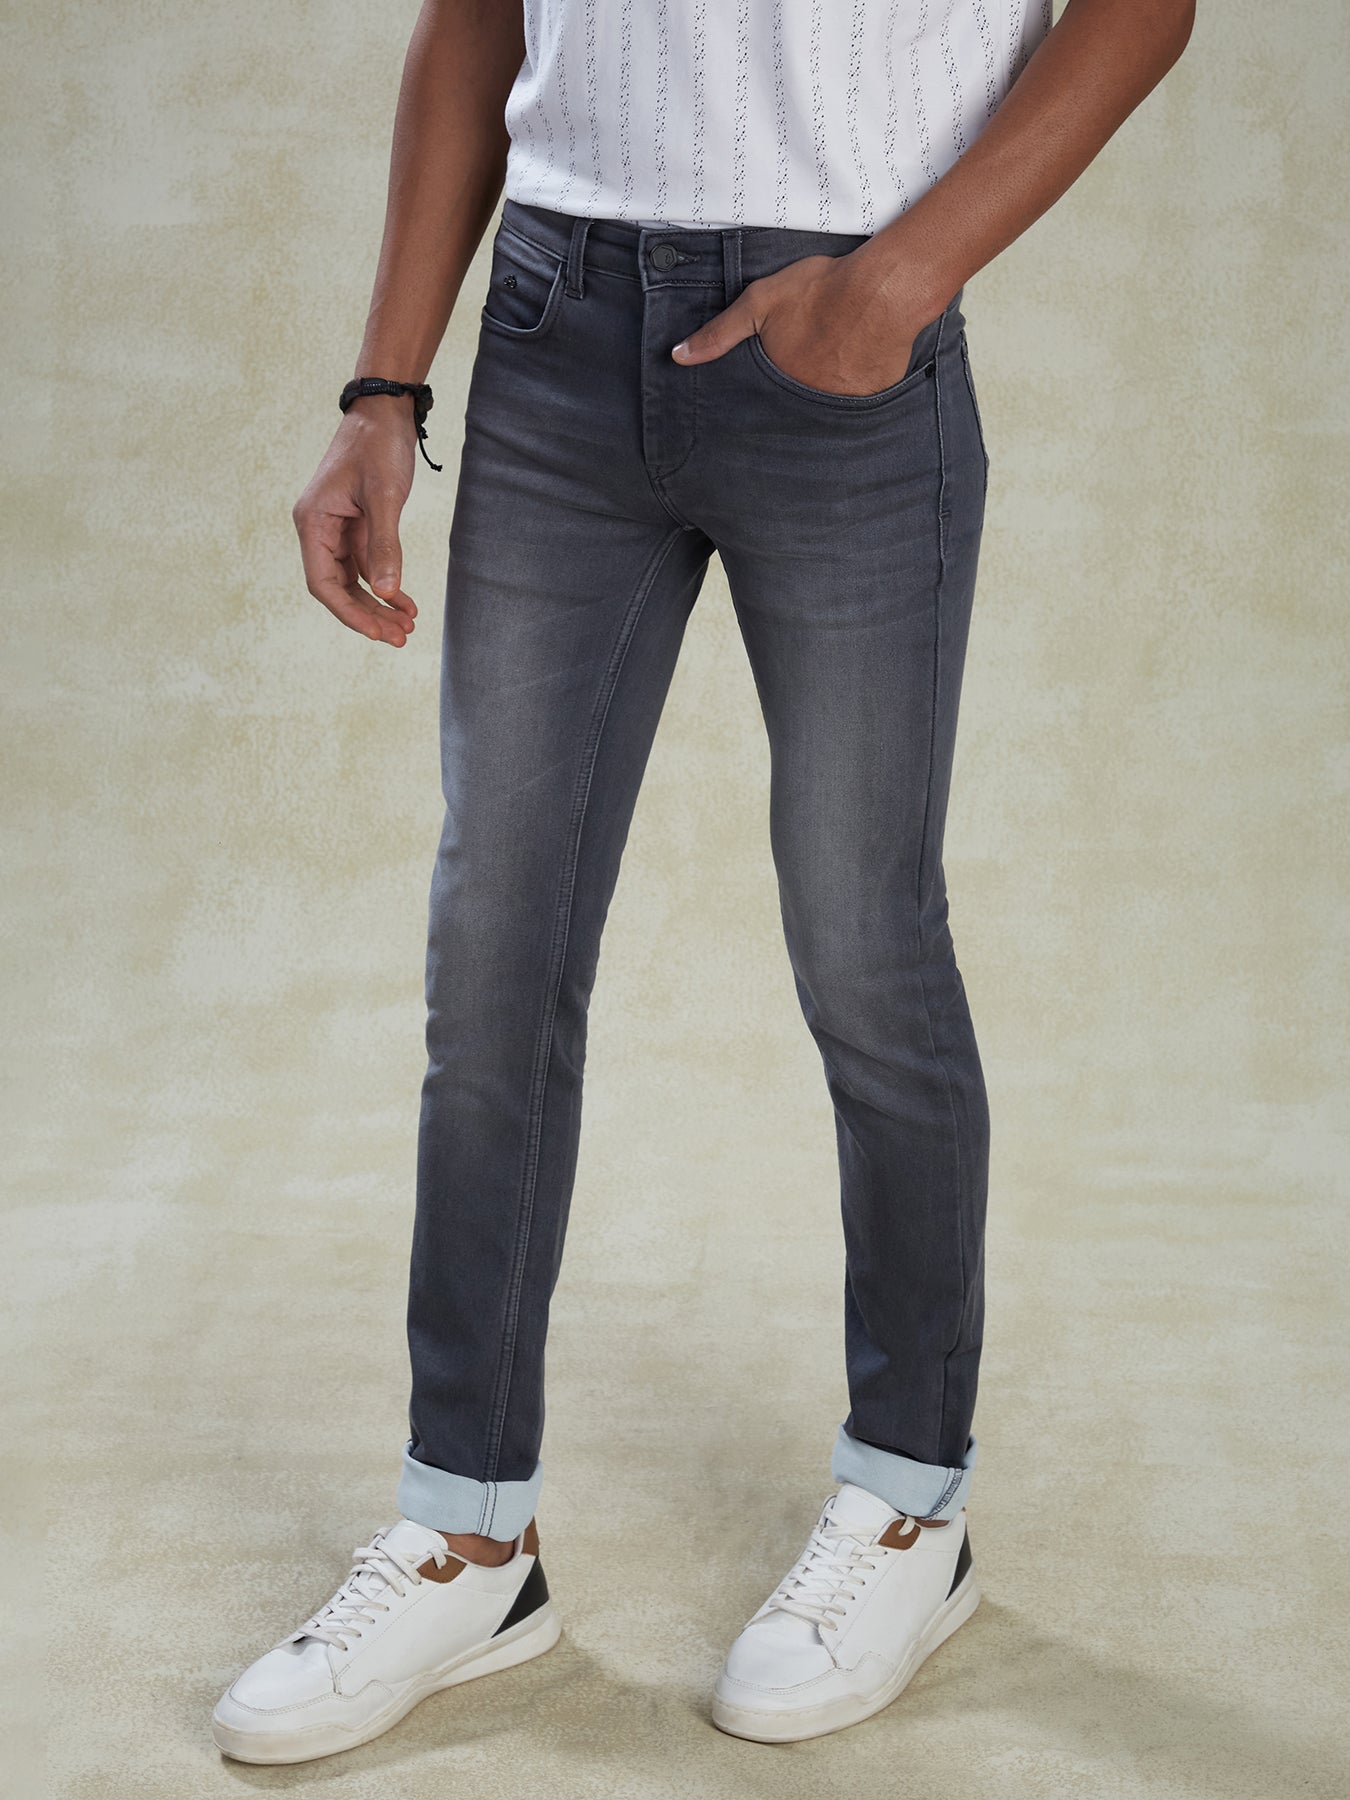 cotton-stretch-grey-narrow-fit-flat-front-casual-mens-jeans